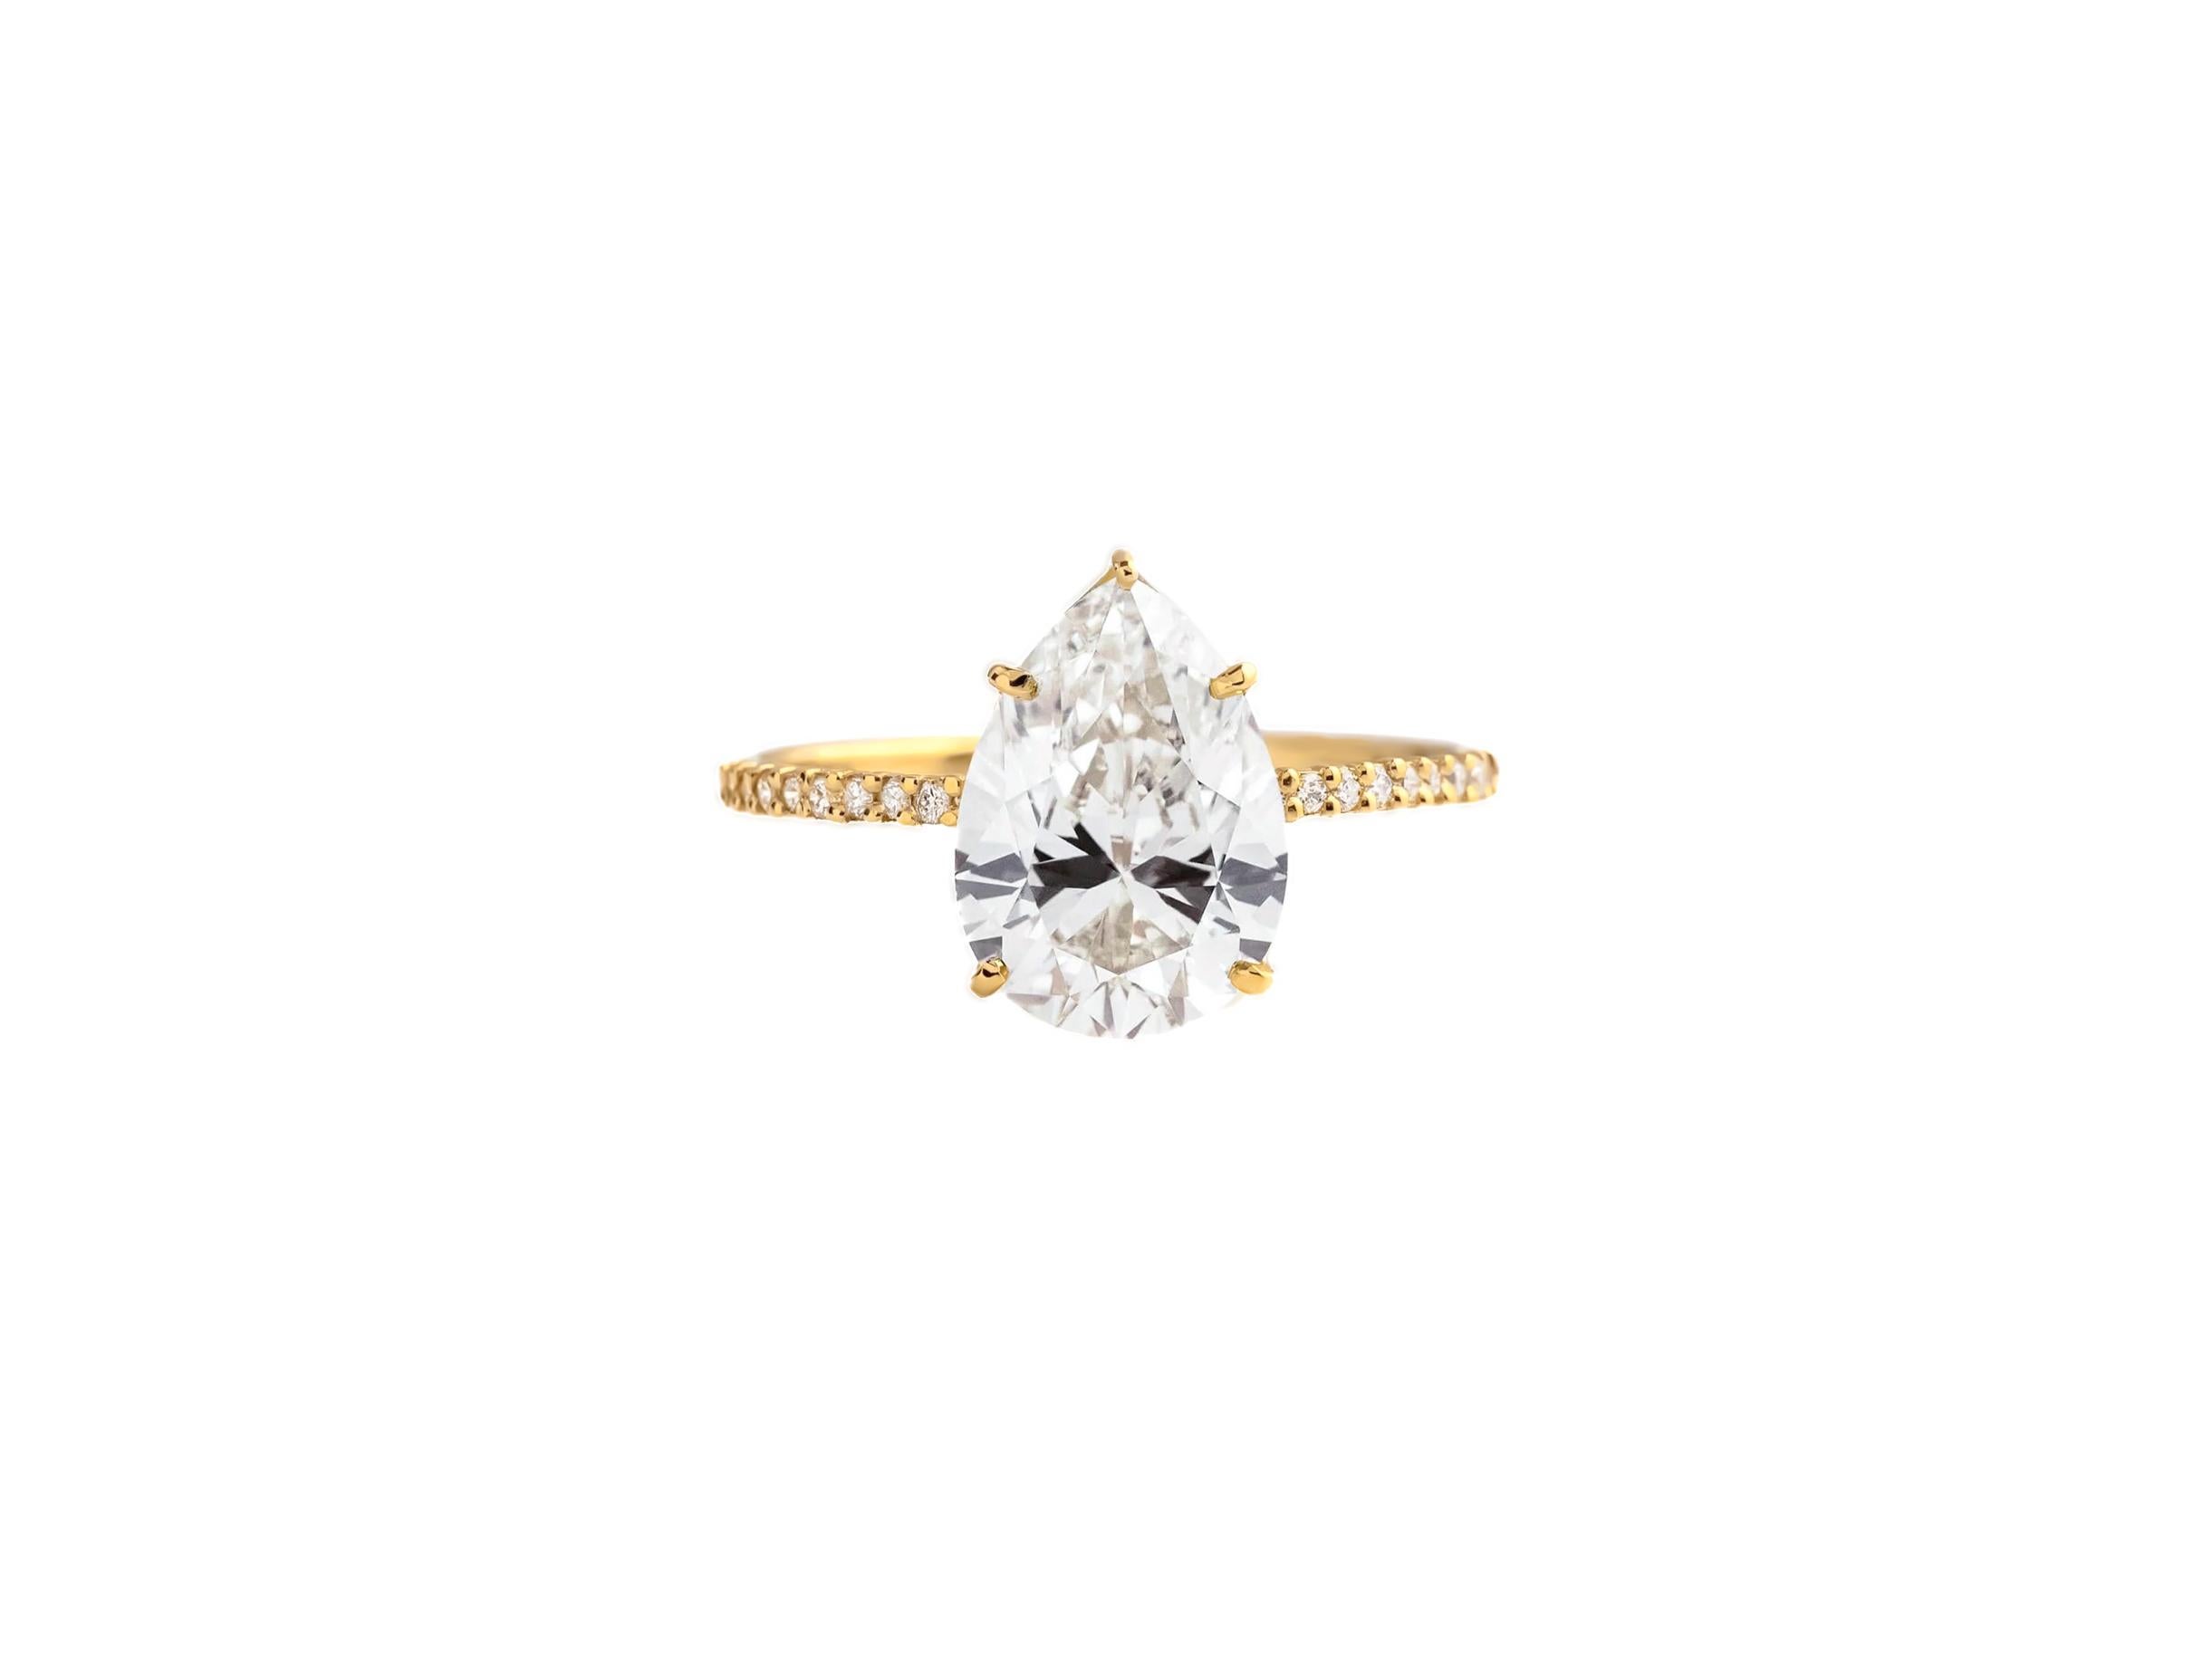 Pear moissanite 14k gold ring. Real moissanite gold ring. Moissanite engagement ring. 1 ct moissanite ring. Drop shines like diamond ring.

Metal: 14k gold
Weight: 1.8 gr. depends from size

Gemstones:
Moissanite: 1 piece, oval cut, G/VS, 1 ct
Side